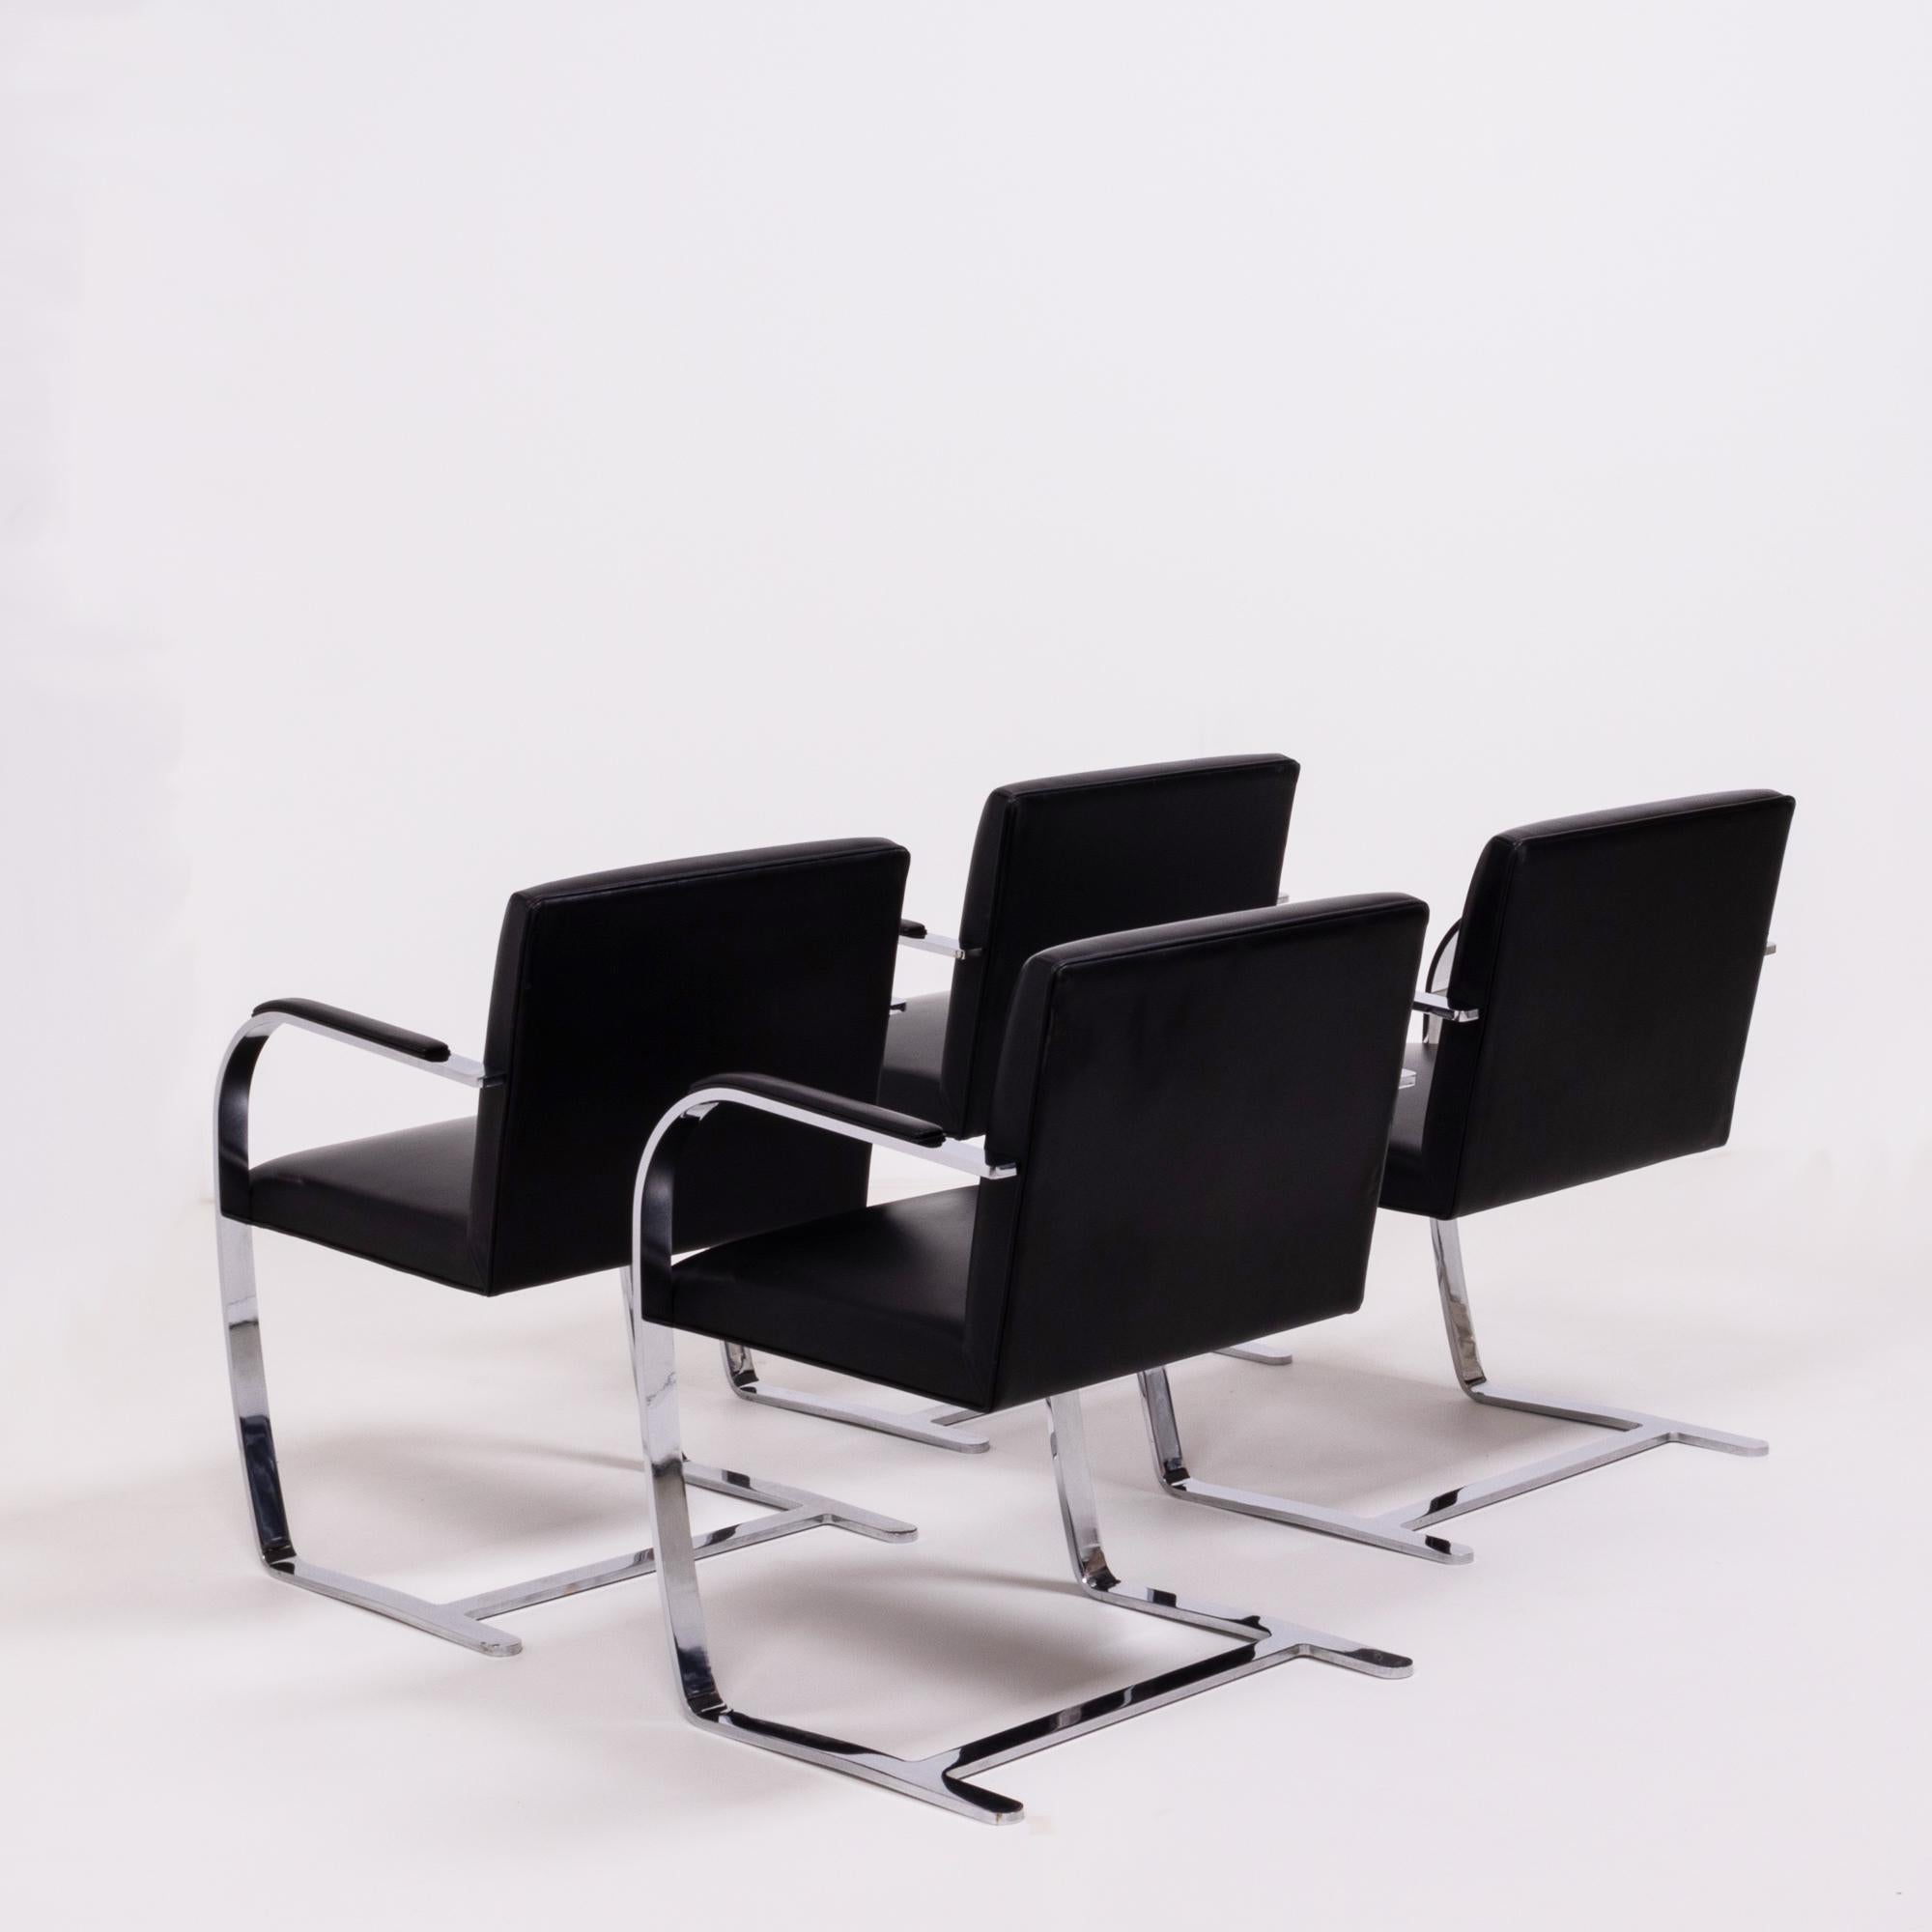 Italian Knoll  Brno Modernist Black Leather Flat Bar Cantilever Chairs, Set of 4